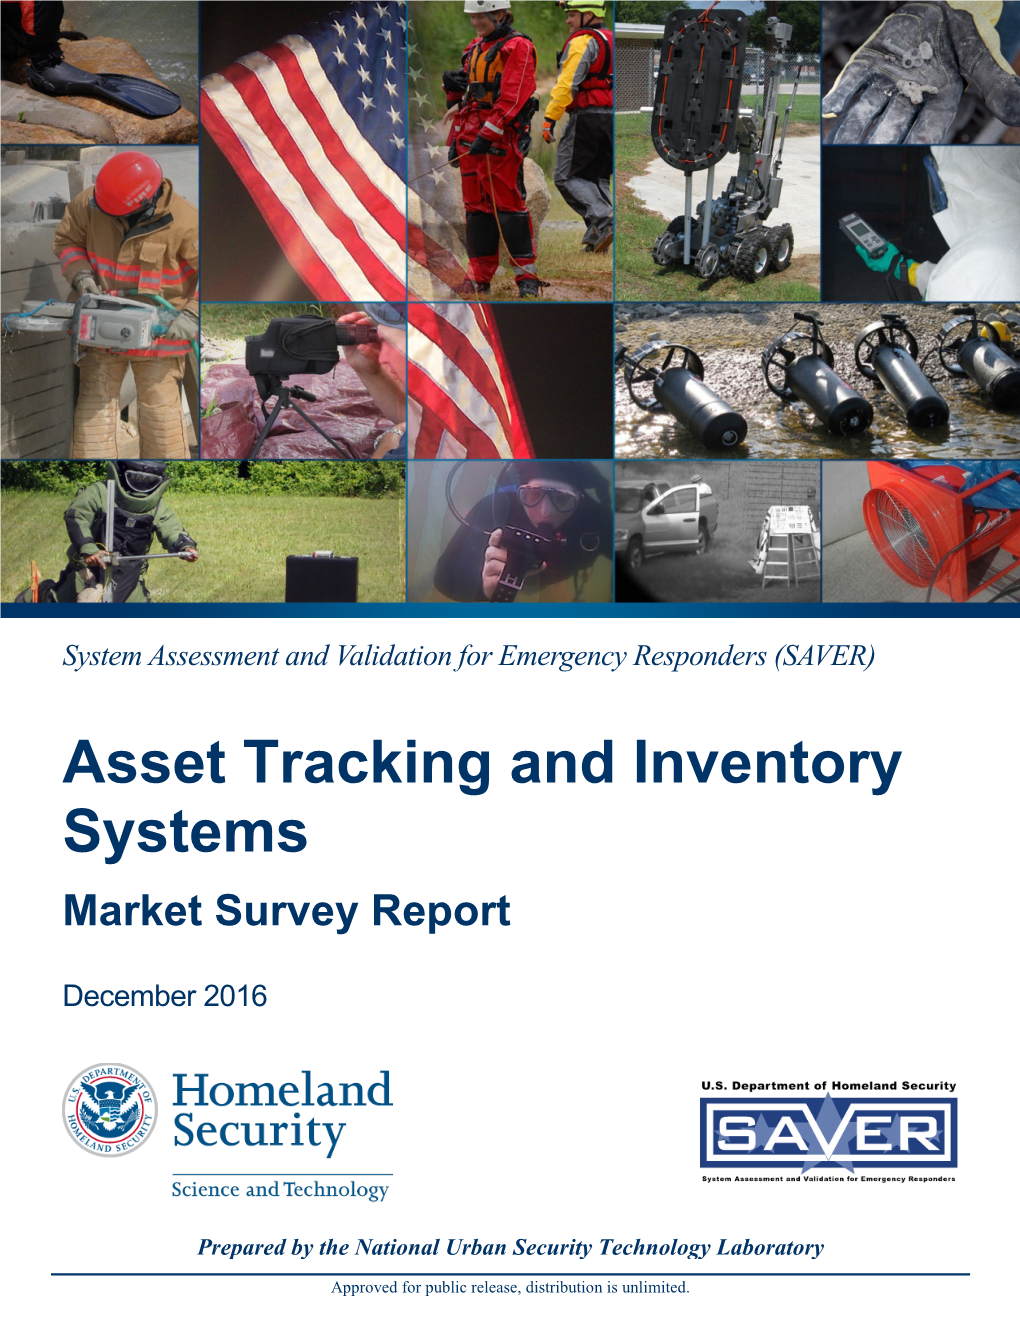 Asset Tracking and Inventory Systems Market Survey Report